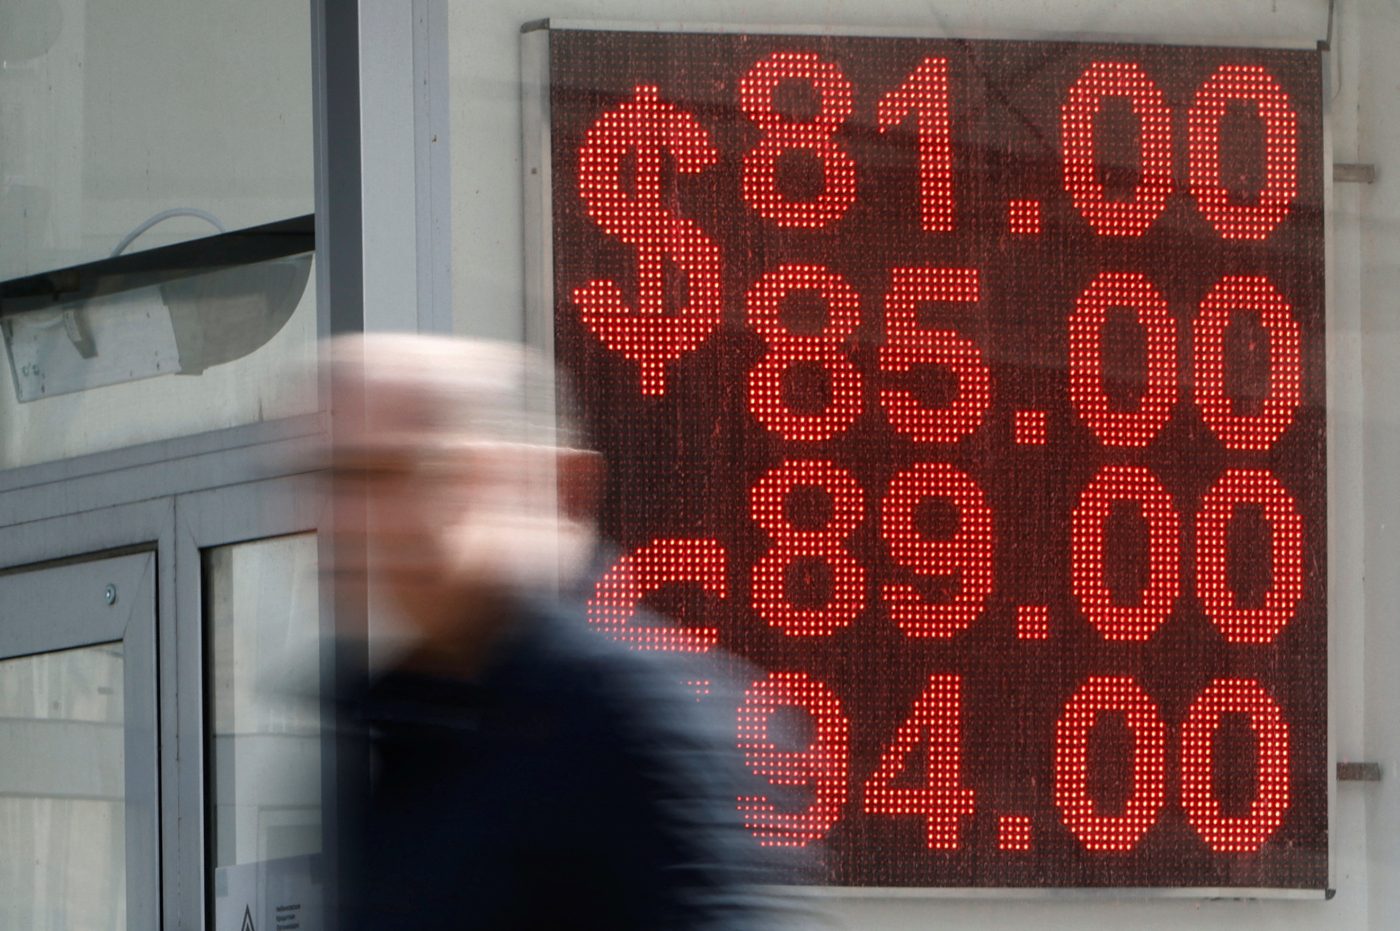 Photo: A man walks past a board showing currency exchange rates of the Euro and the U.S. dollar against the Russian rouble in Moscow, Russia April 7, 2023. Credit: REUTERS/Maxim Shemetov